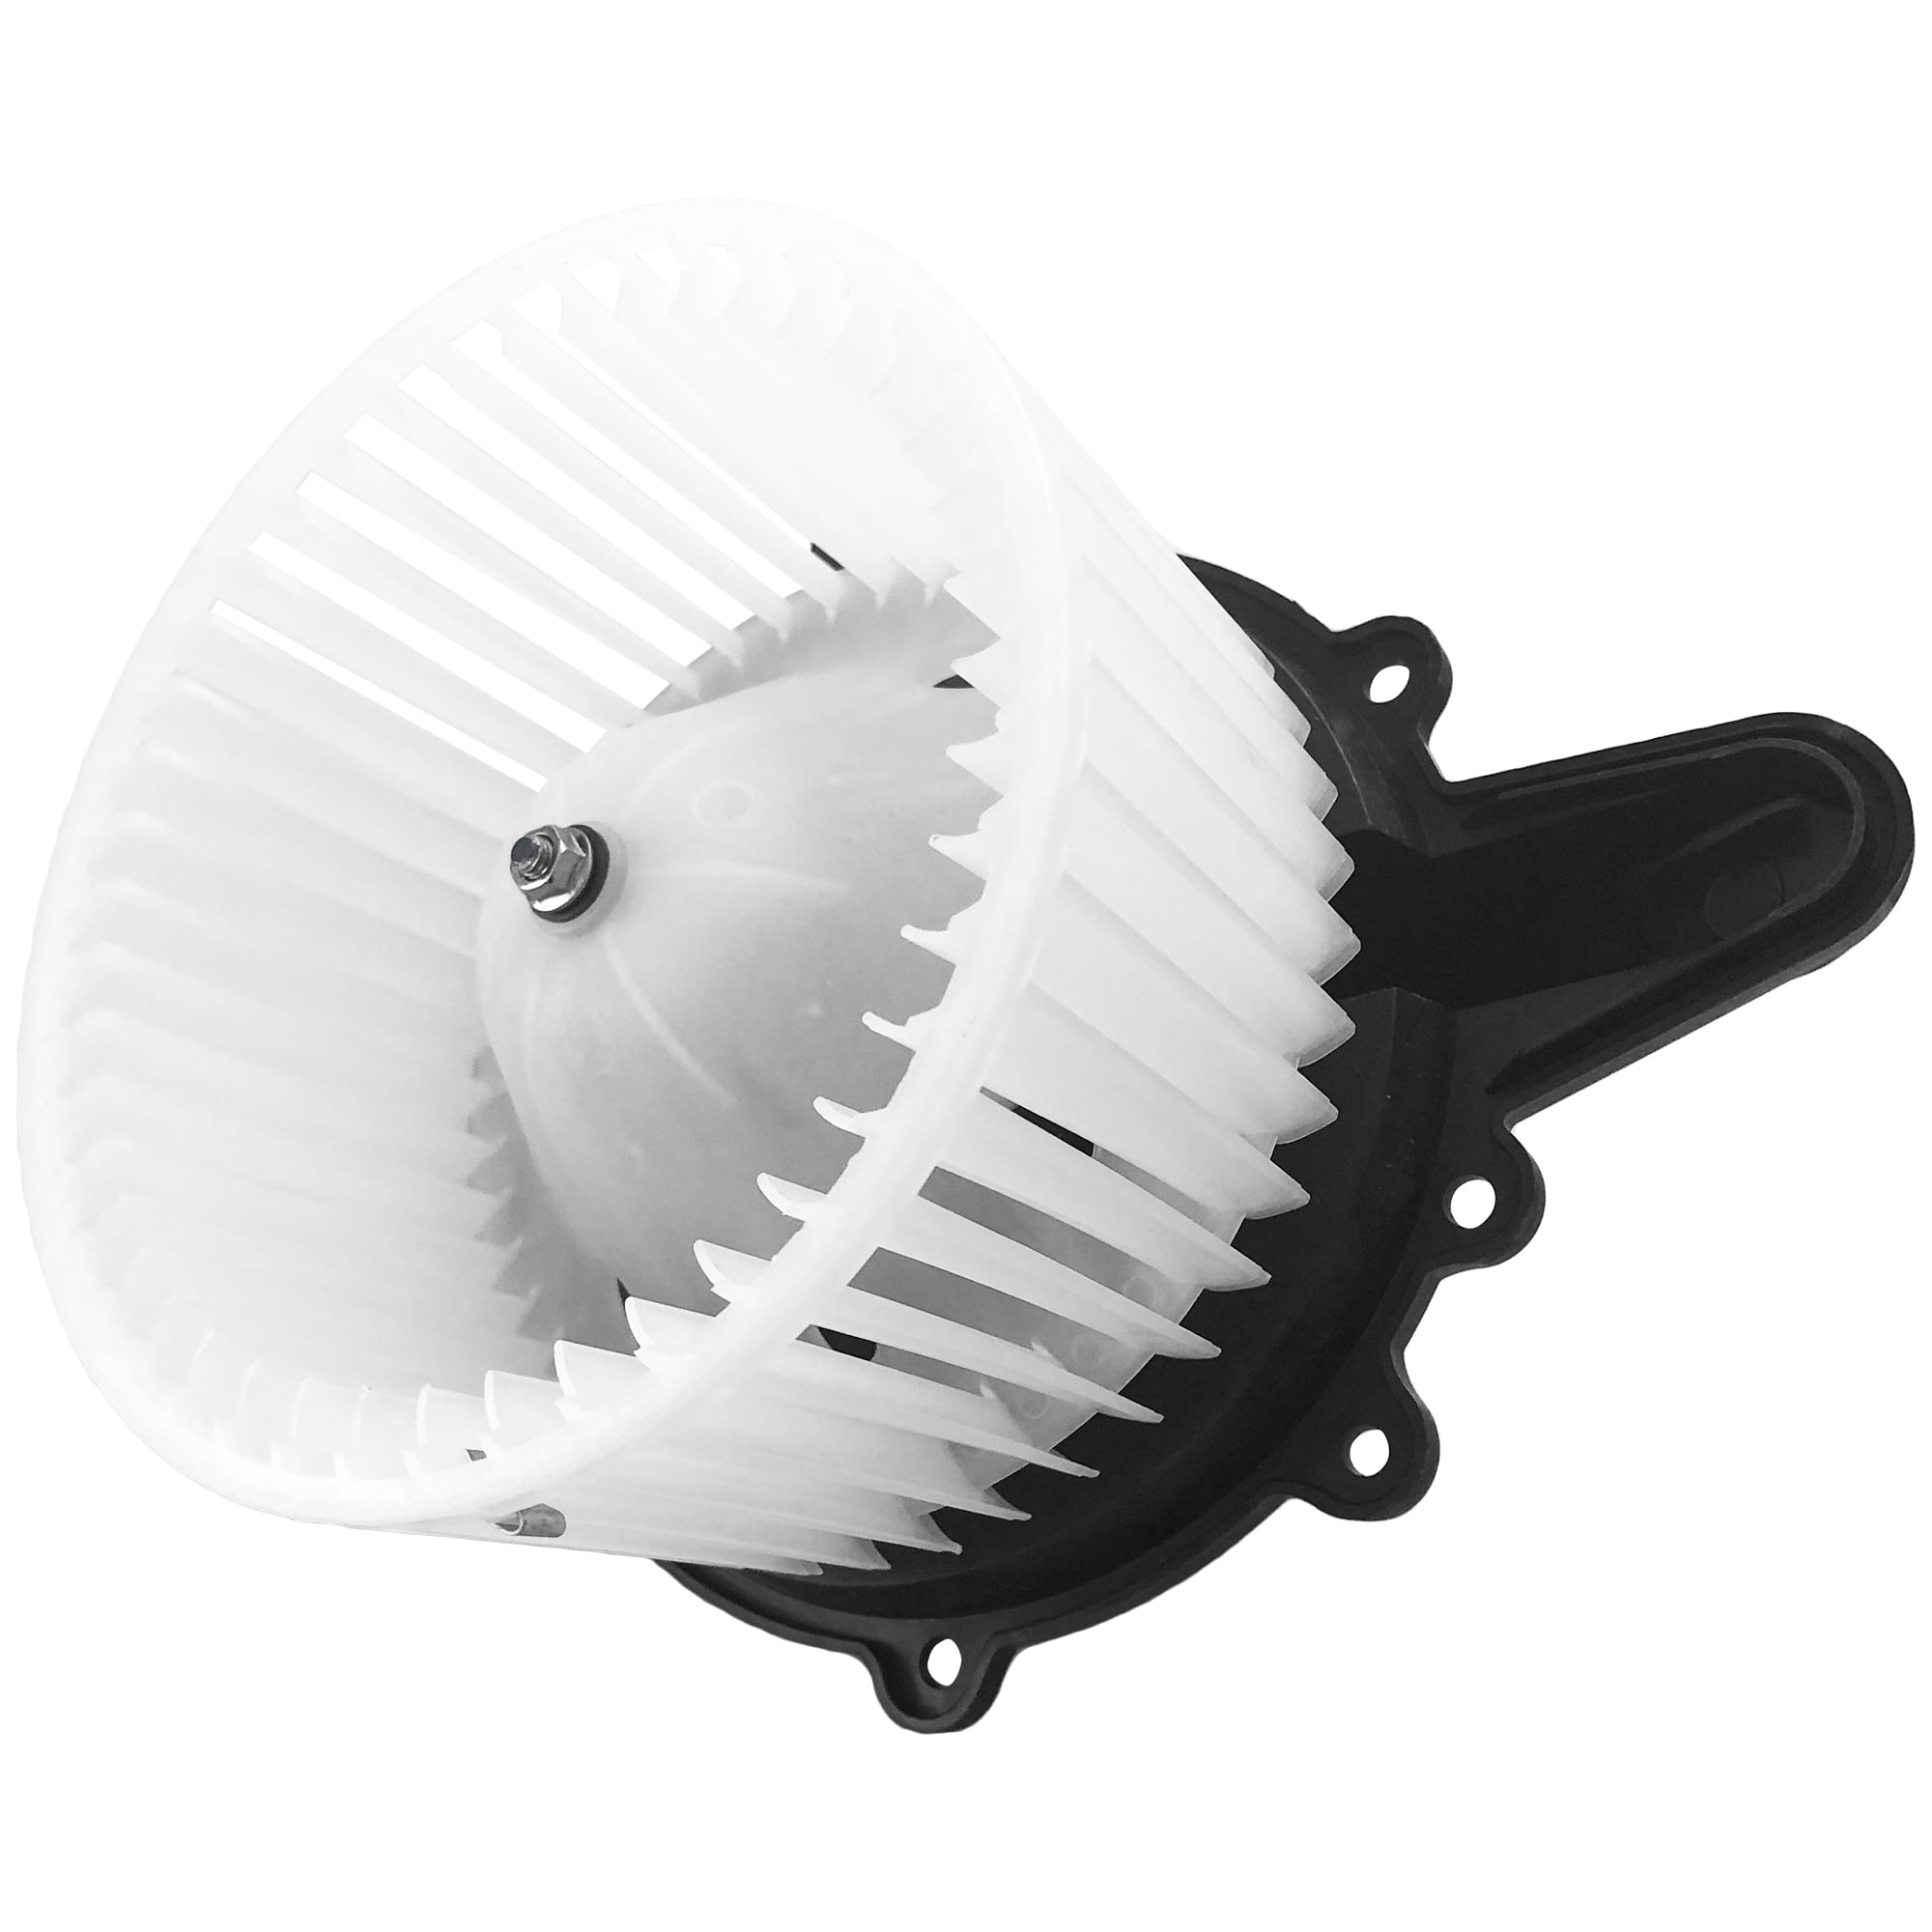 BOXI Blower Motor Fan Assembly for 97-02 Ford Expedition/ 2004 Ford F150 Heritage/ 97-03 Ford F150/ 97-99 Ford F250 Light Duty/ 02-03 Lincoln Blackwood/ 98-02 Lincoln Navigator/ XL7Z19805EA 700027 